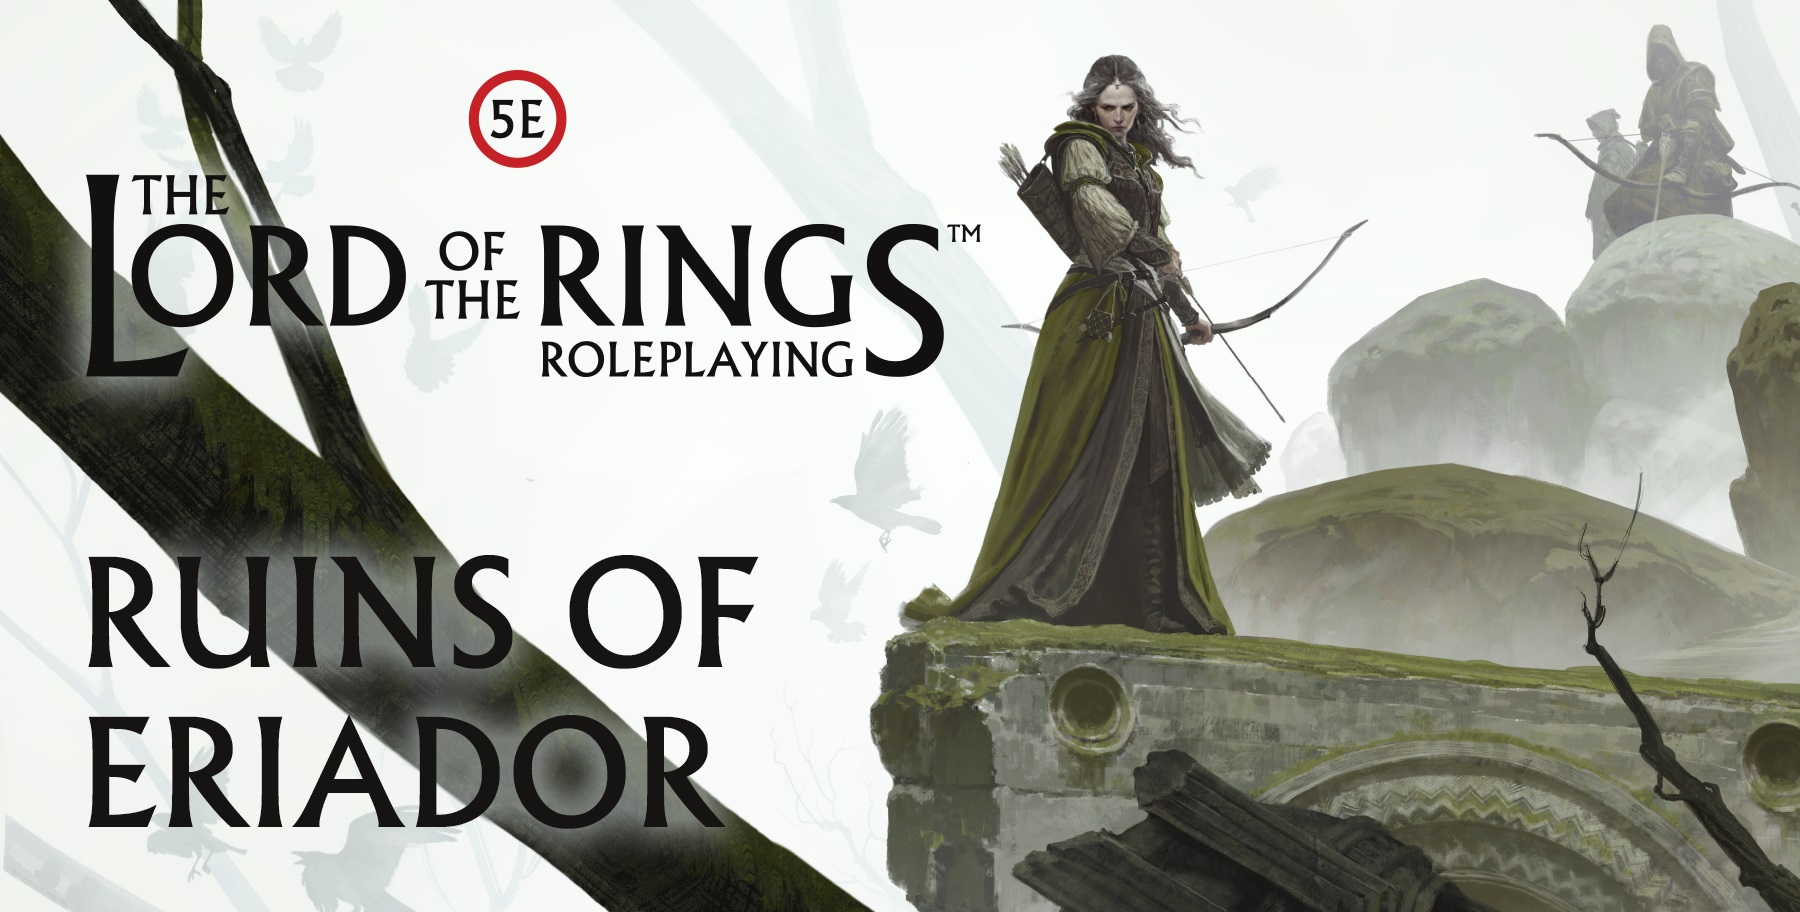 Lord of the rings RPG 5E: Ruins of Eriador